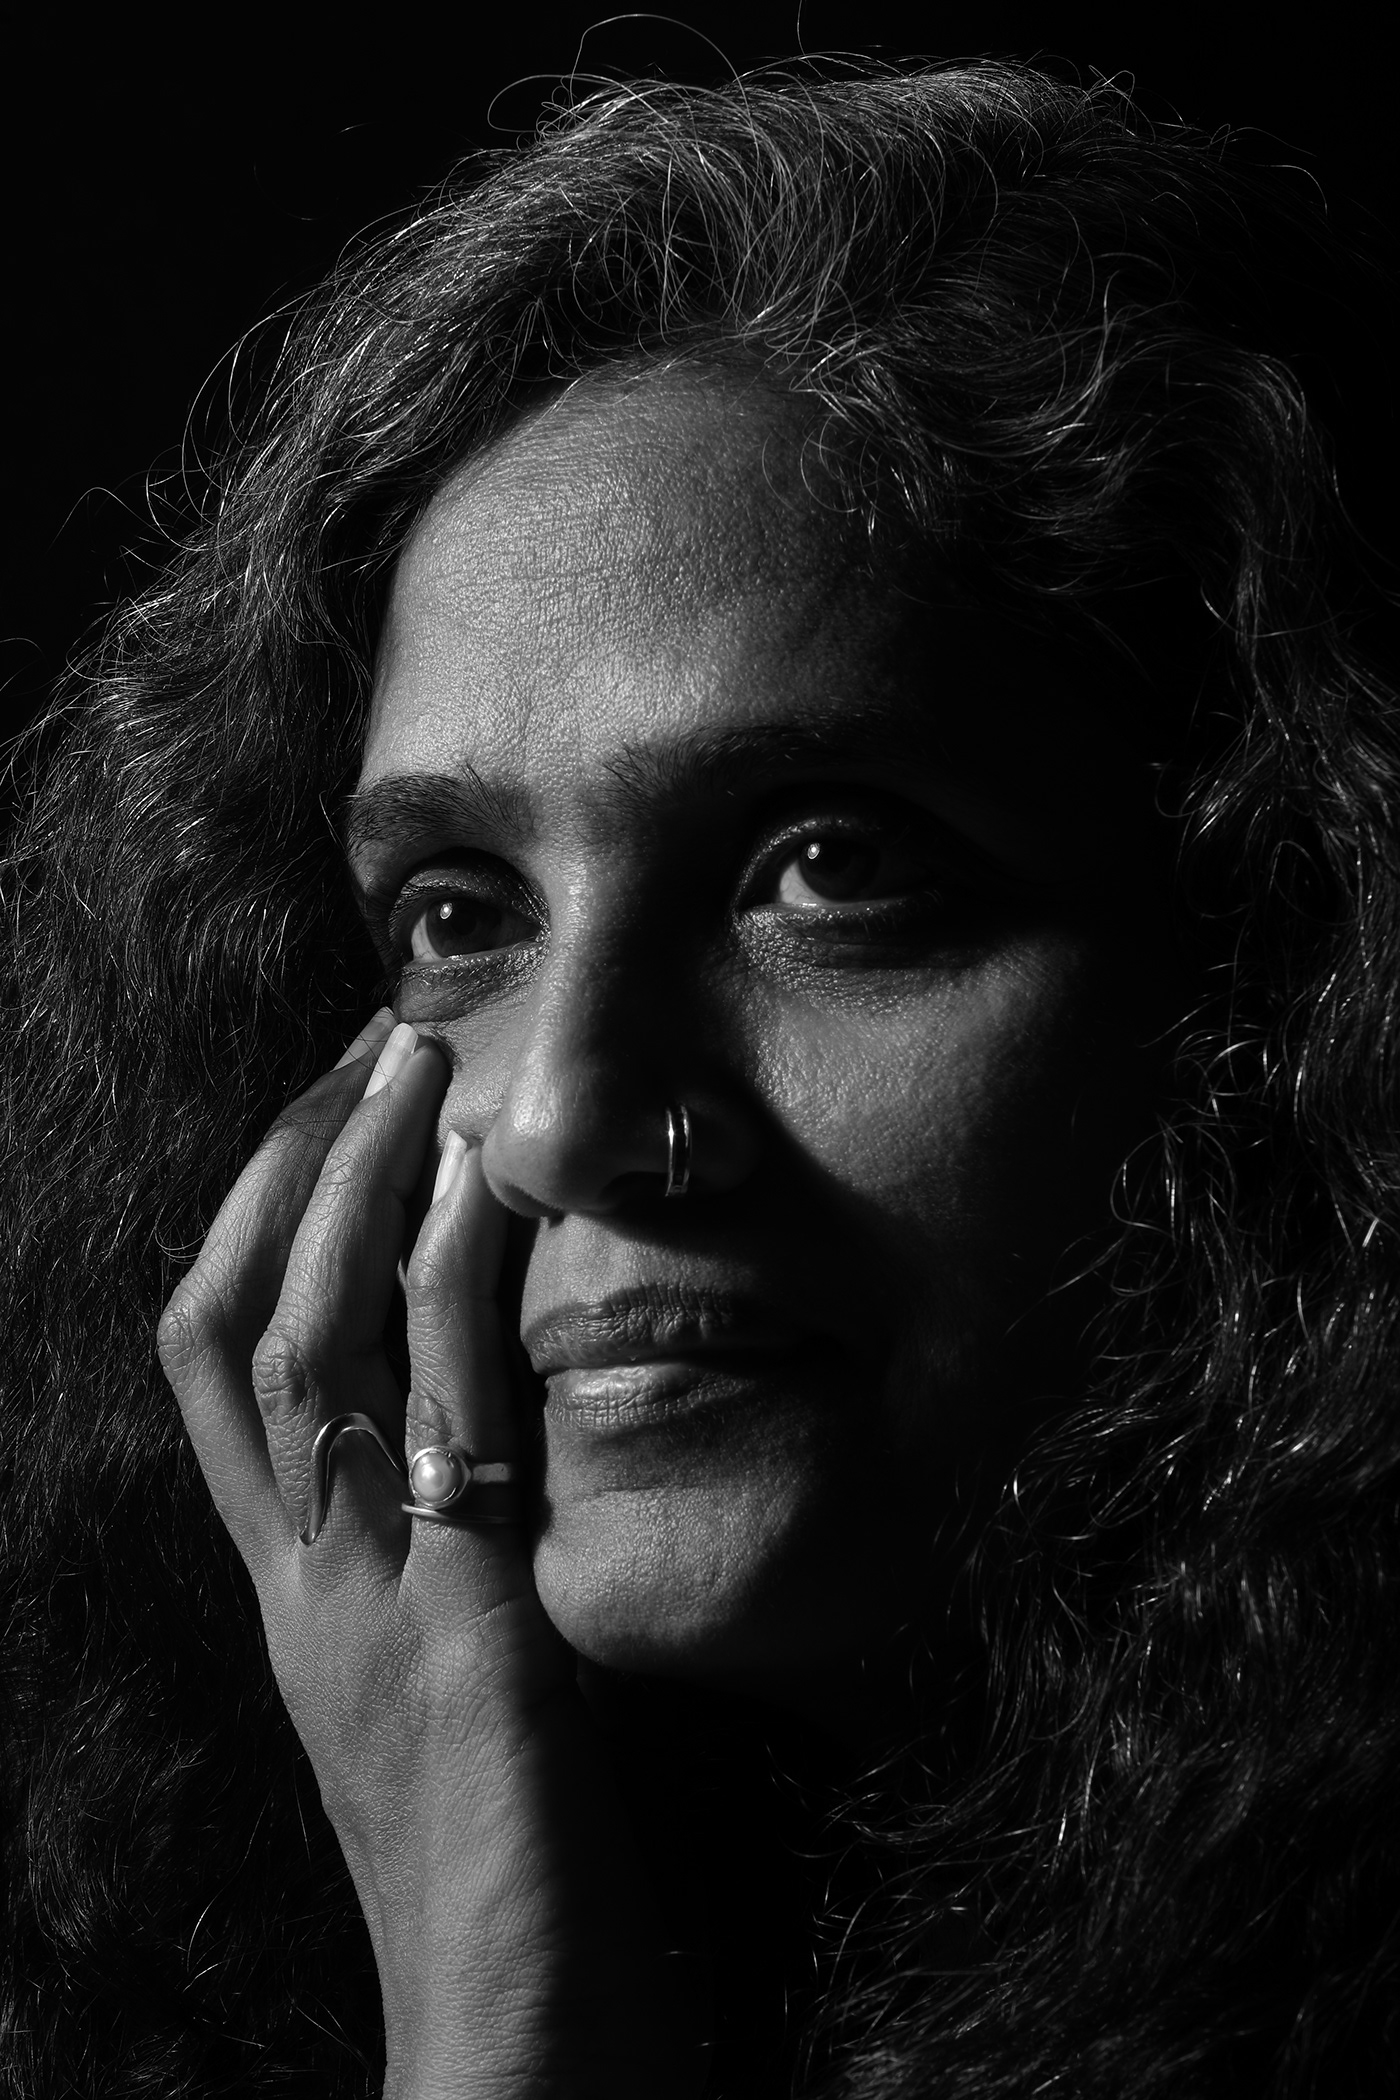 portrait photography black and white low key photography photoshoot Photography  Cynthia Sapna photography cynthia sapna anju shetty artique